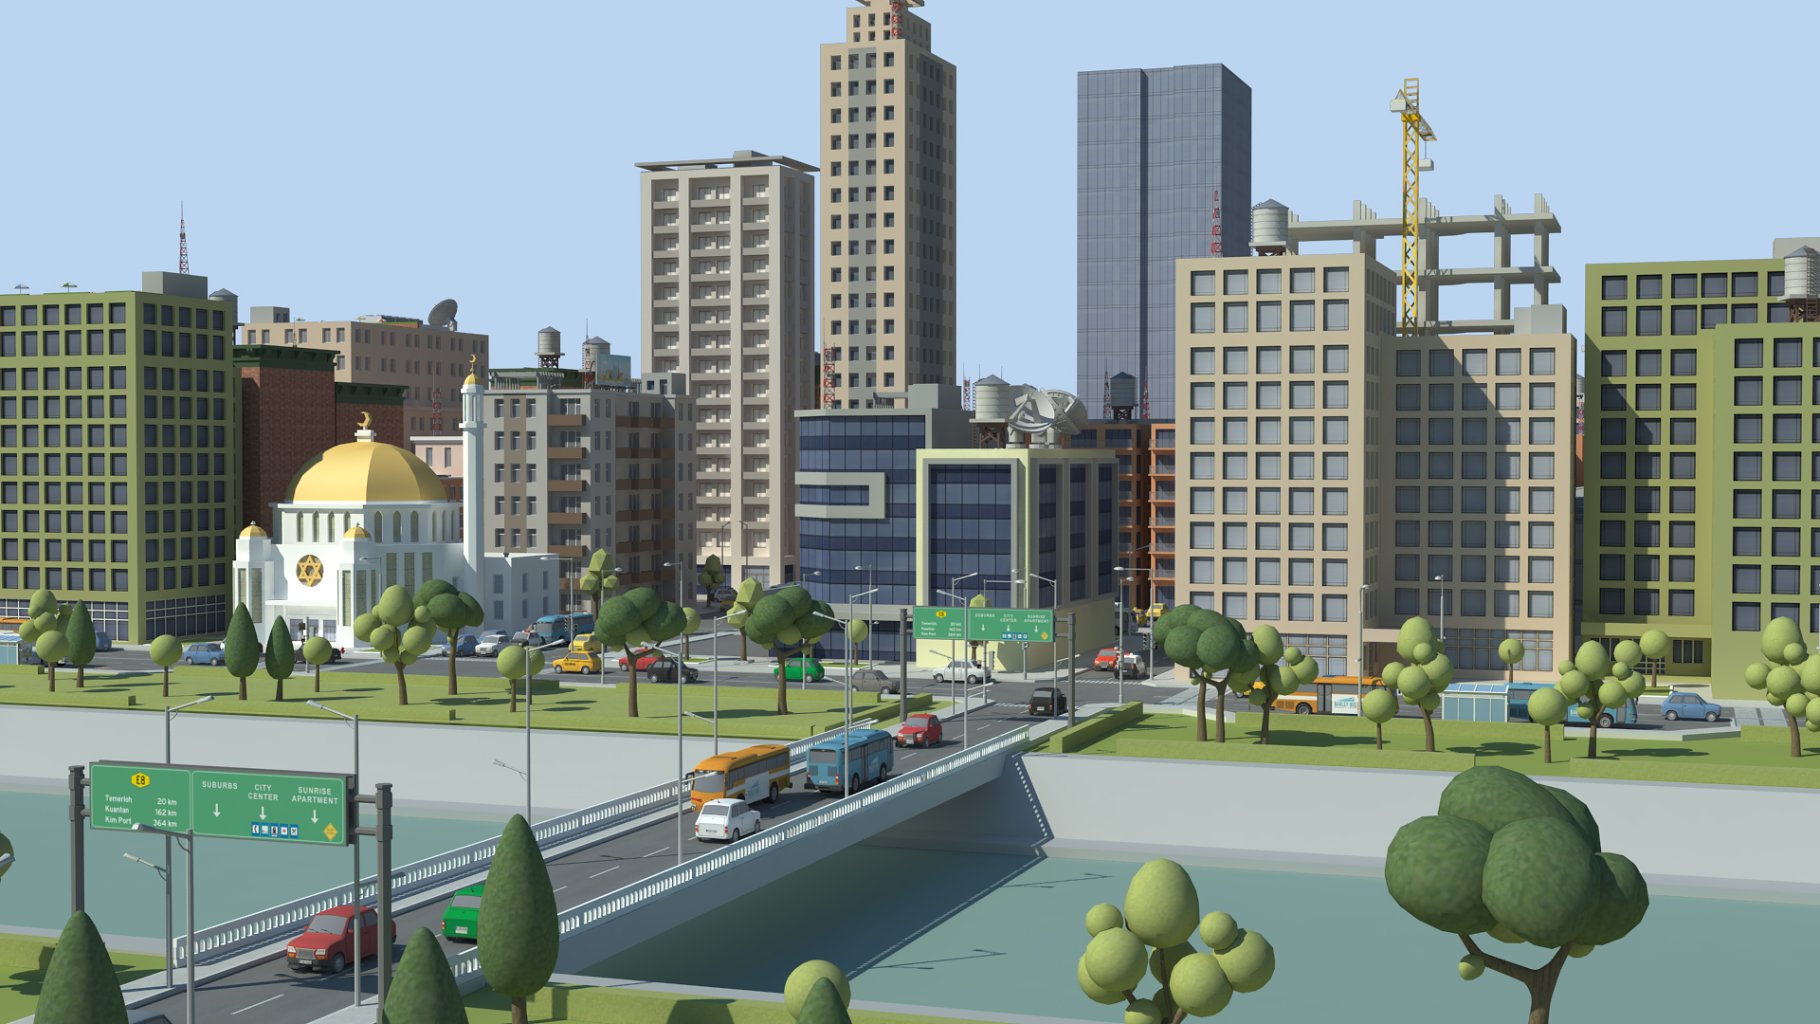 Rendering of an adorable lowpoly city 3d model